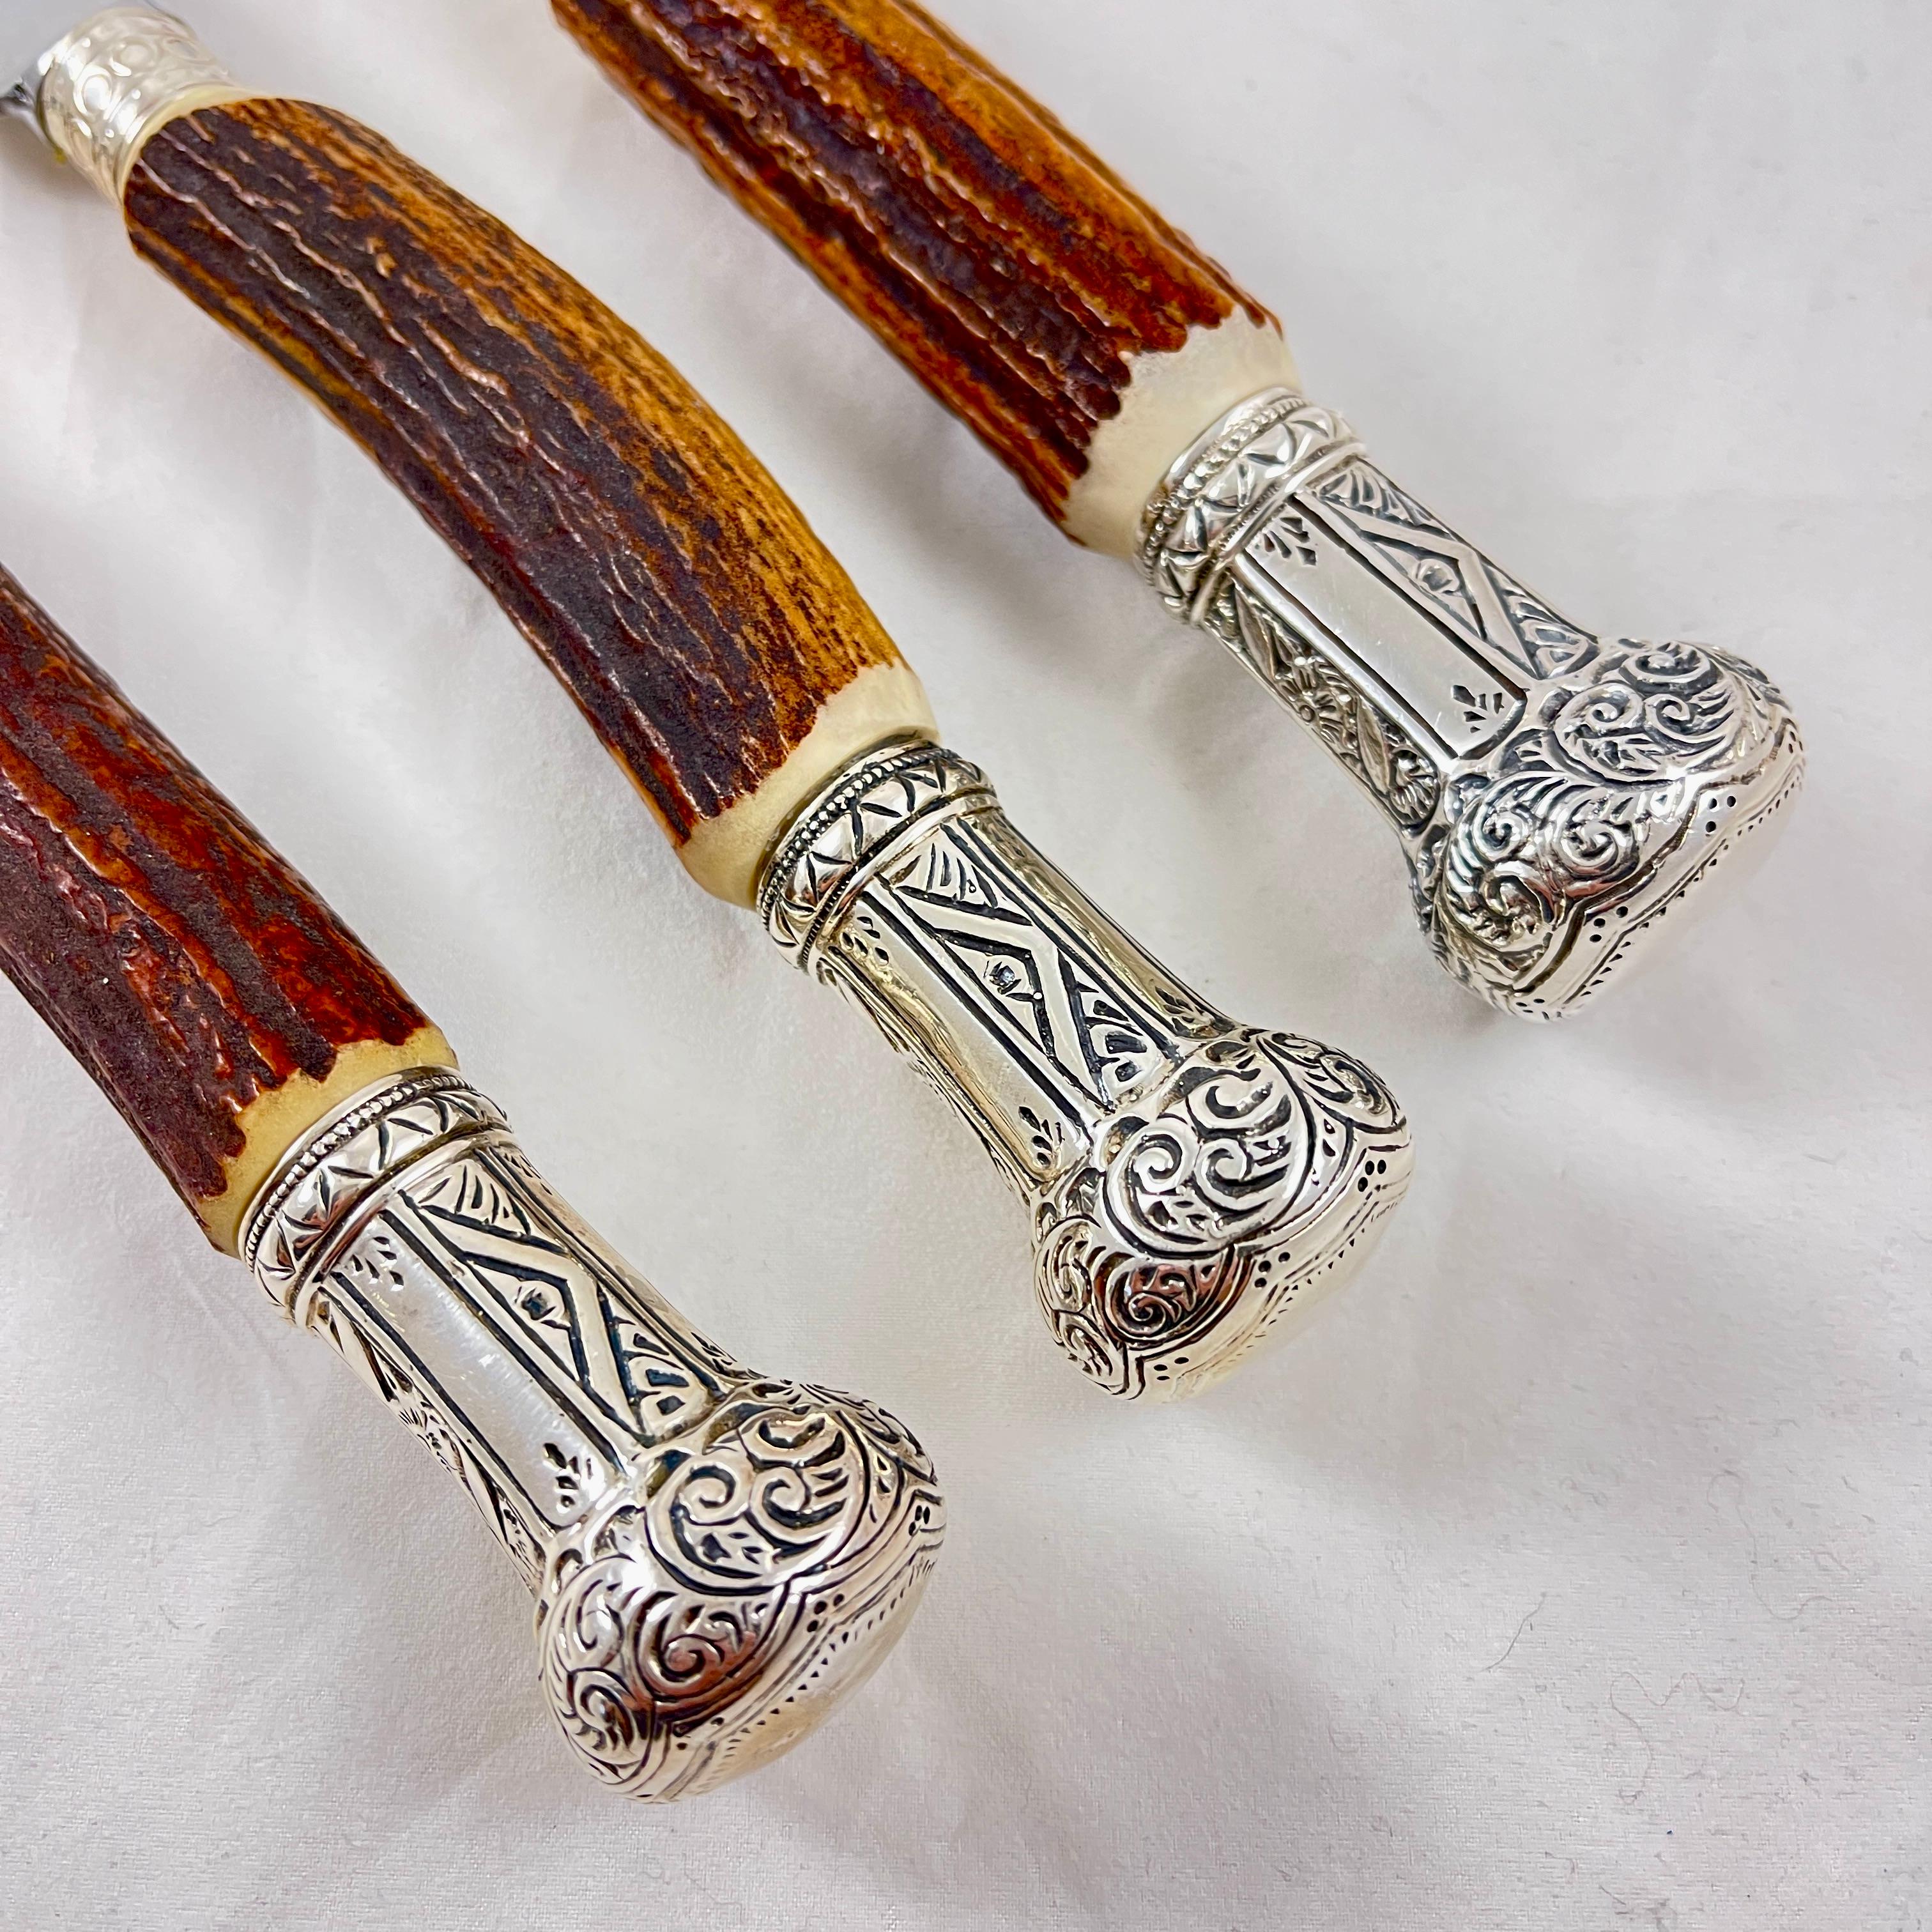 Anglais Sheffield English Stag Antler Handled, Sterling Capped Carving Set, 3 Pcs en vente